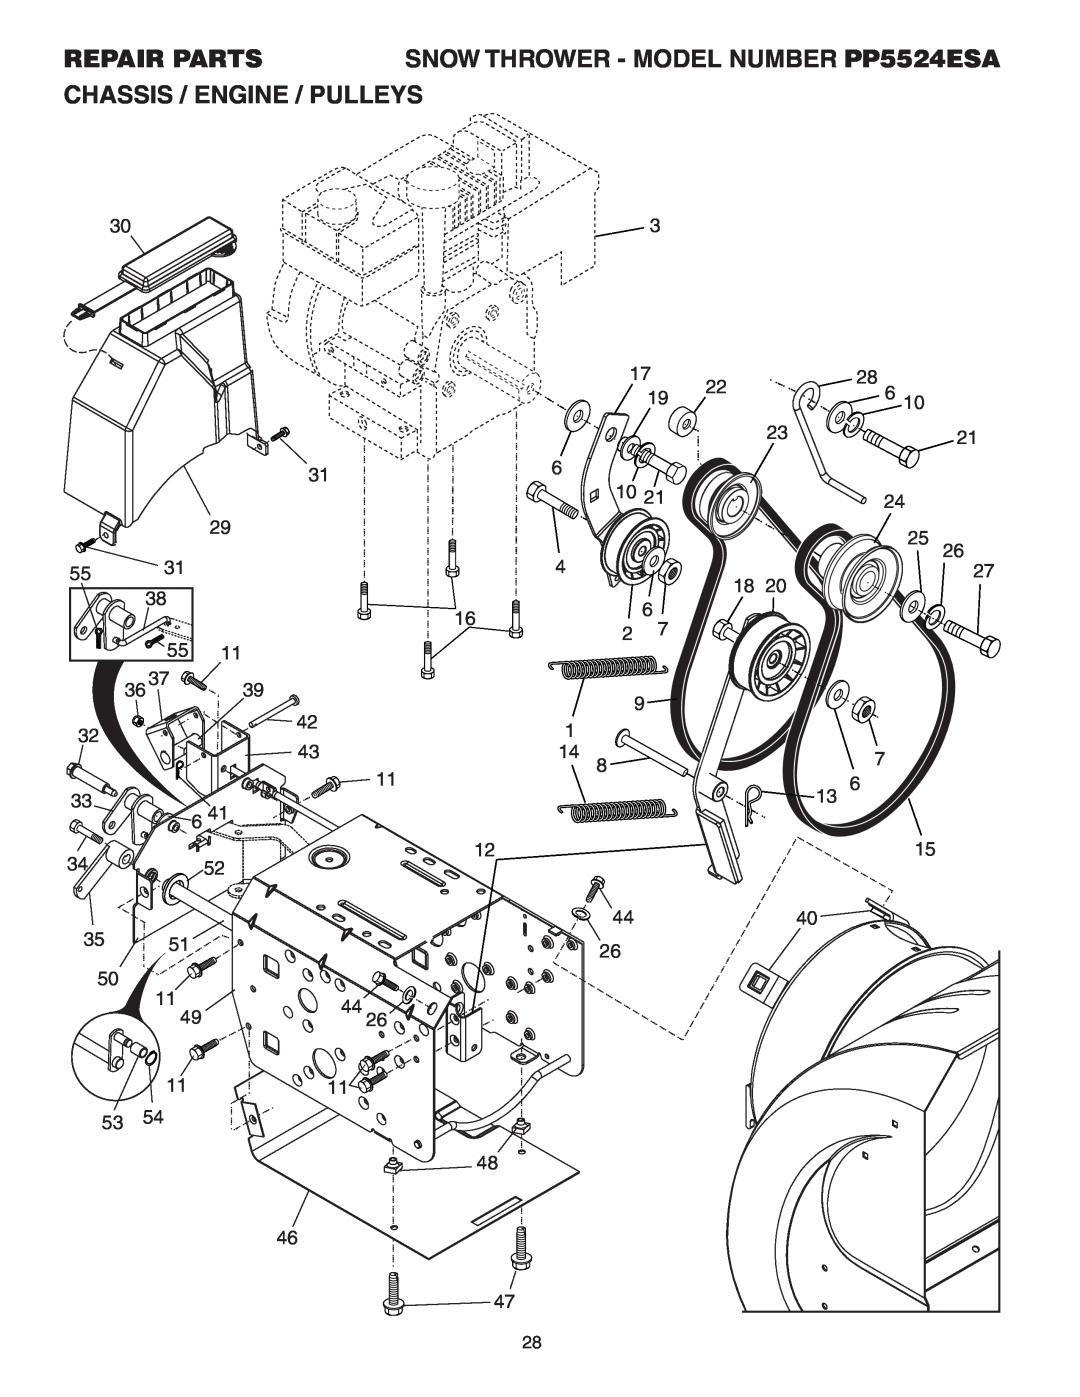 Poulan owner manual Chassis / Engine / Pulleys, Repair Parts, SNOW THROWER - MODEL NUMBER PP5524ESA 